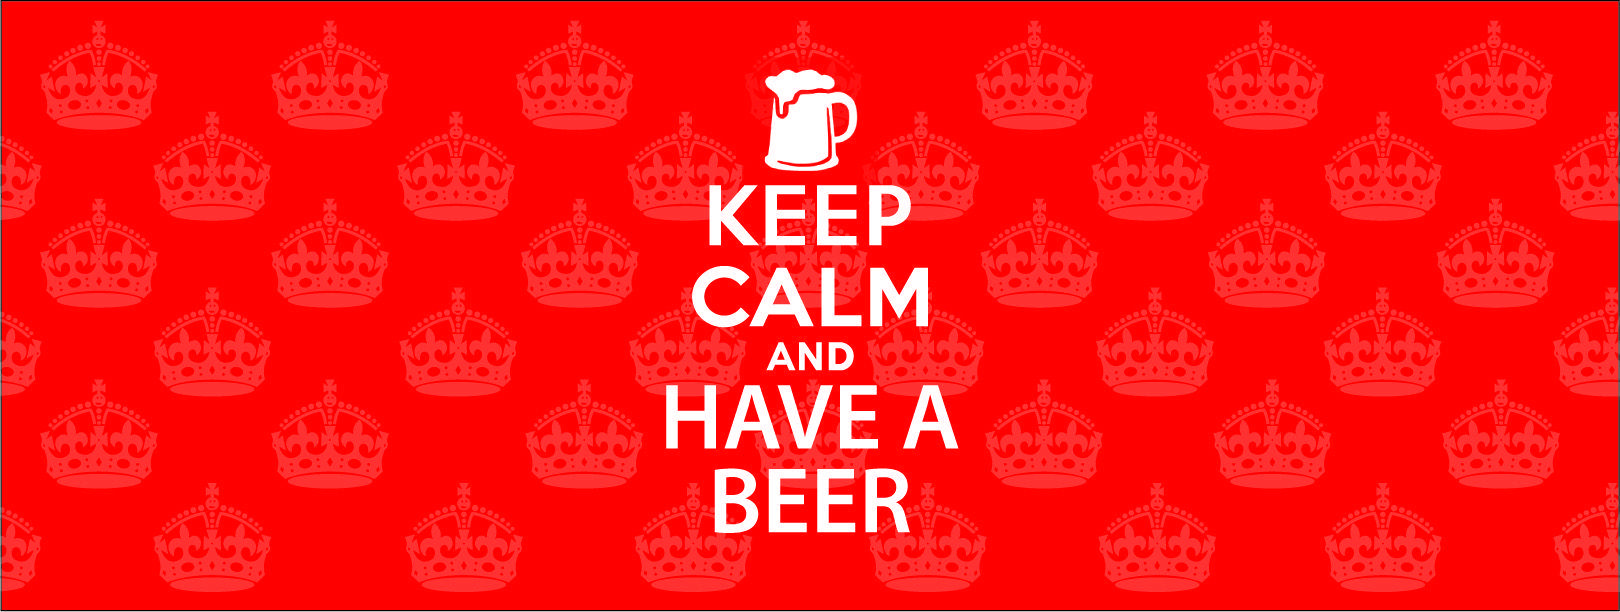 Bar with Red Crown Logo - Keep Calm and have a beer Red crown design bar runner great for home ...